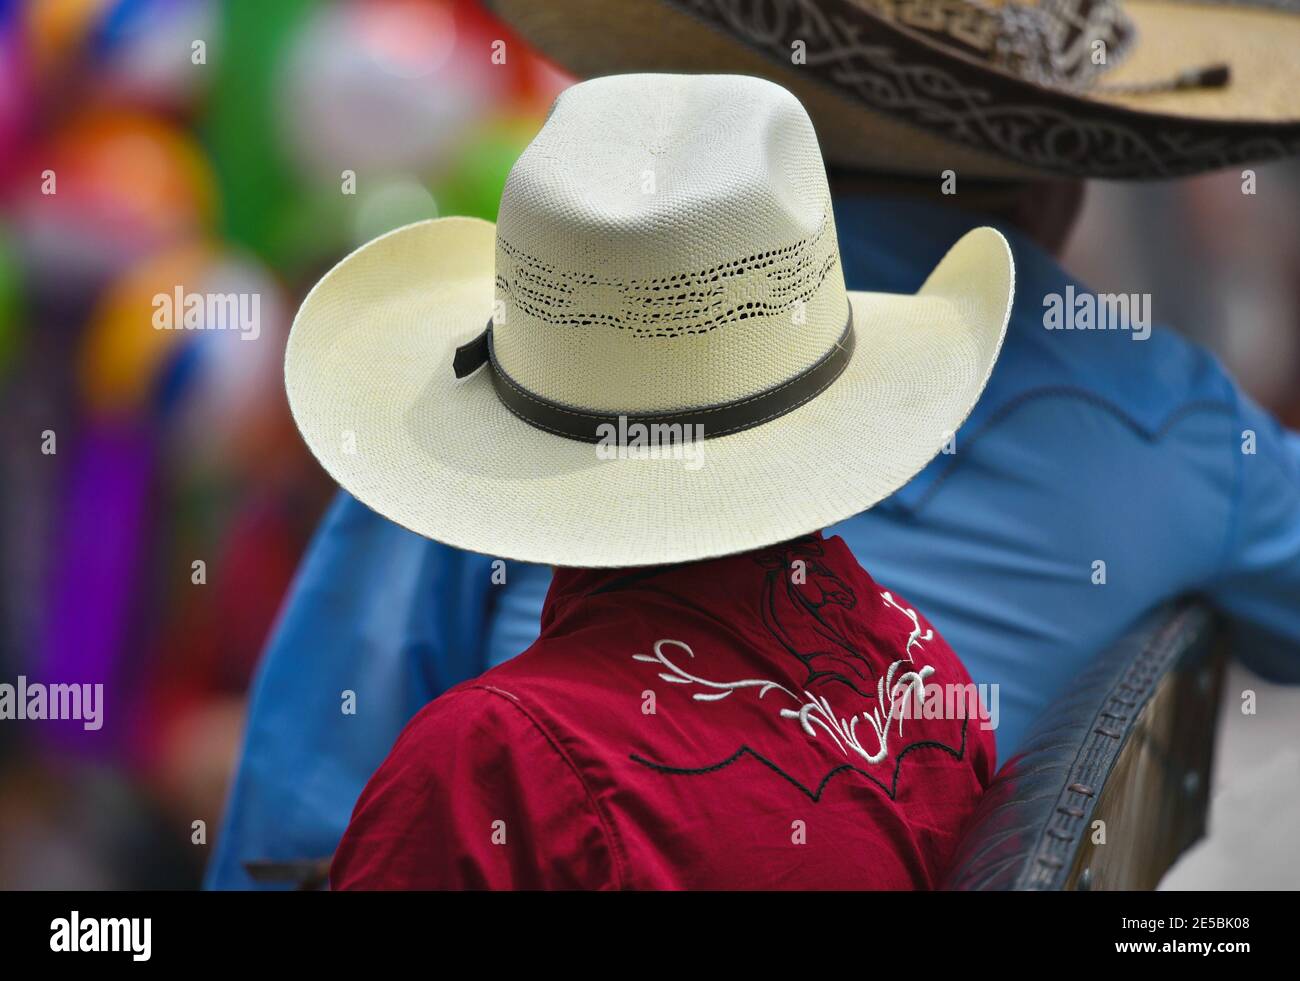 Local young boy wearing an authentic Mexican straw sombrero hat in the historic center of San Miguel de Allende, Guanajuato Mexico. Stock Photo